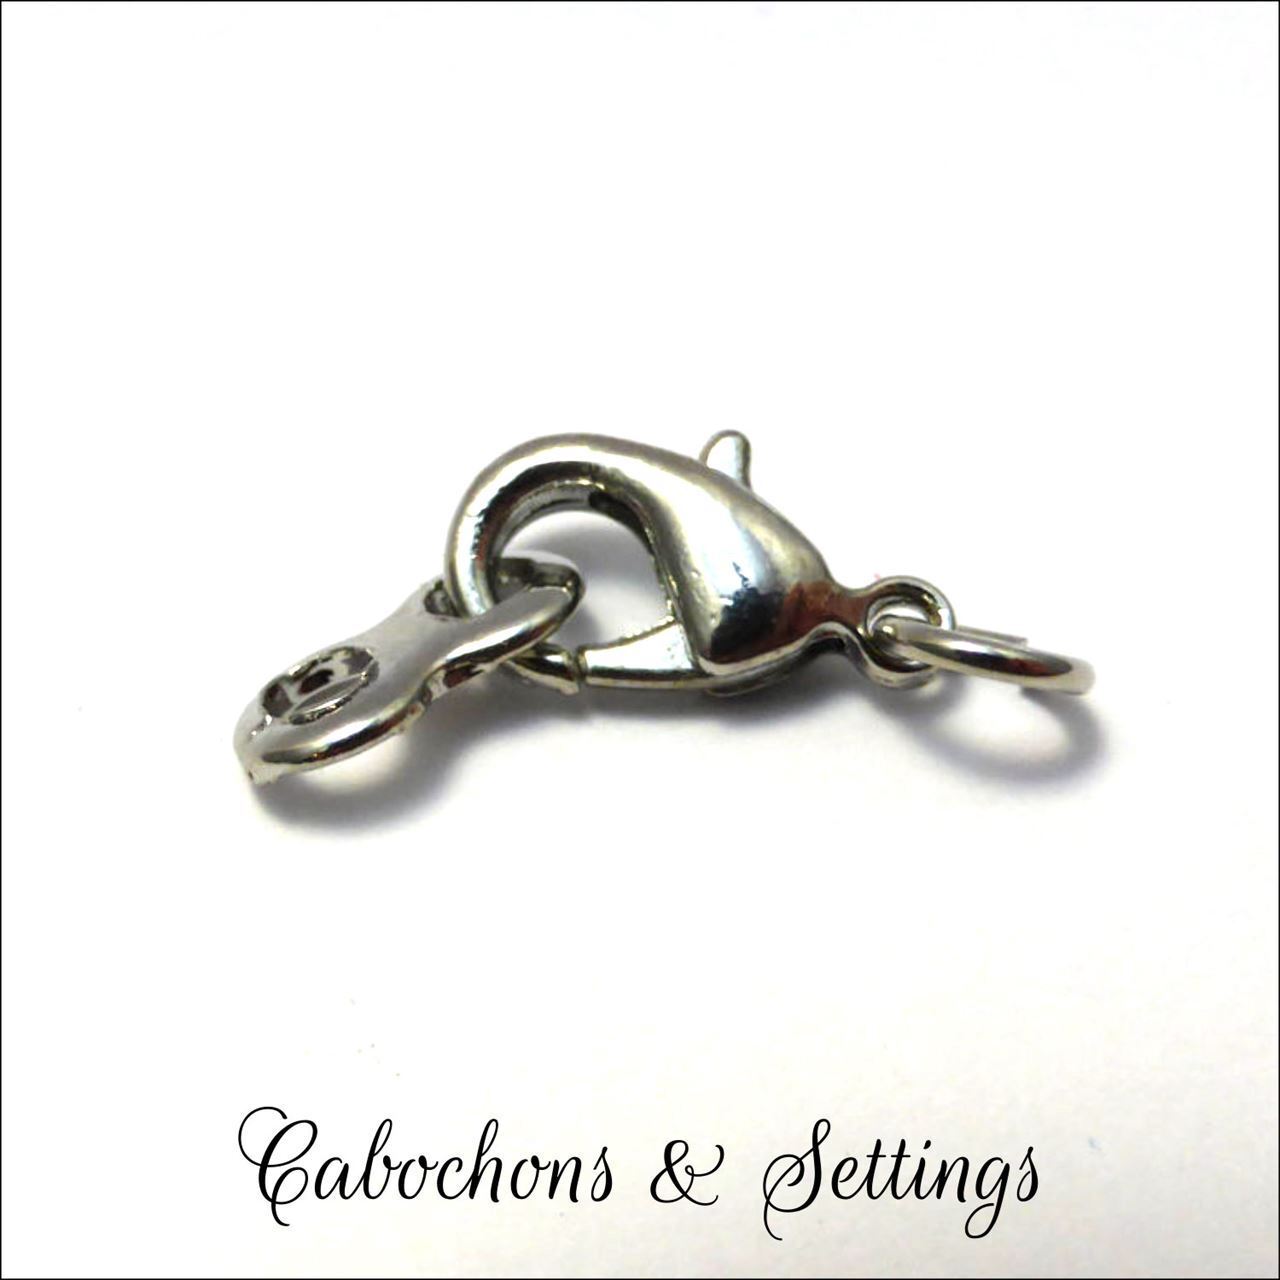 16mm x 8mm Large Lobster Sterling Silver Clasp w/ ring